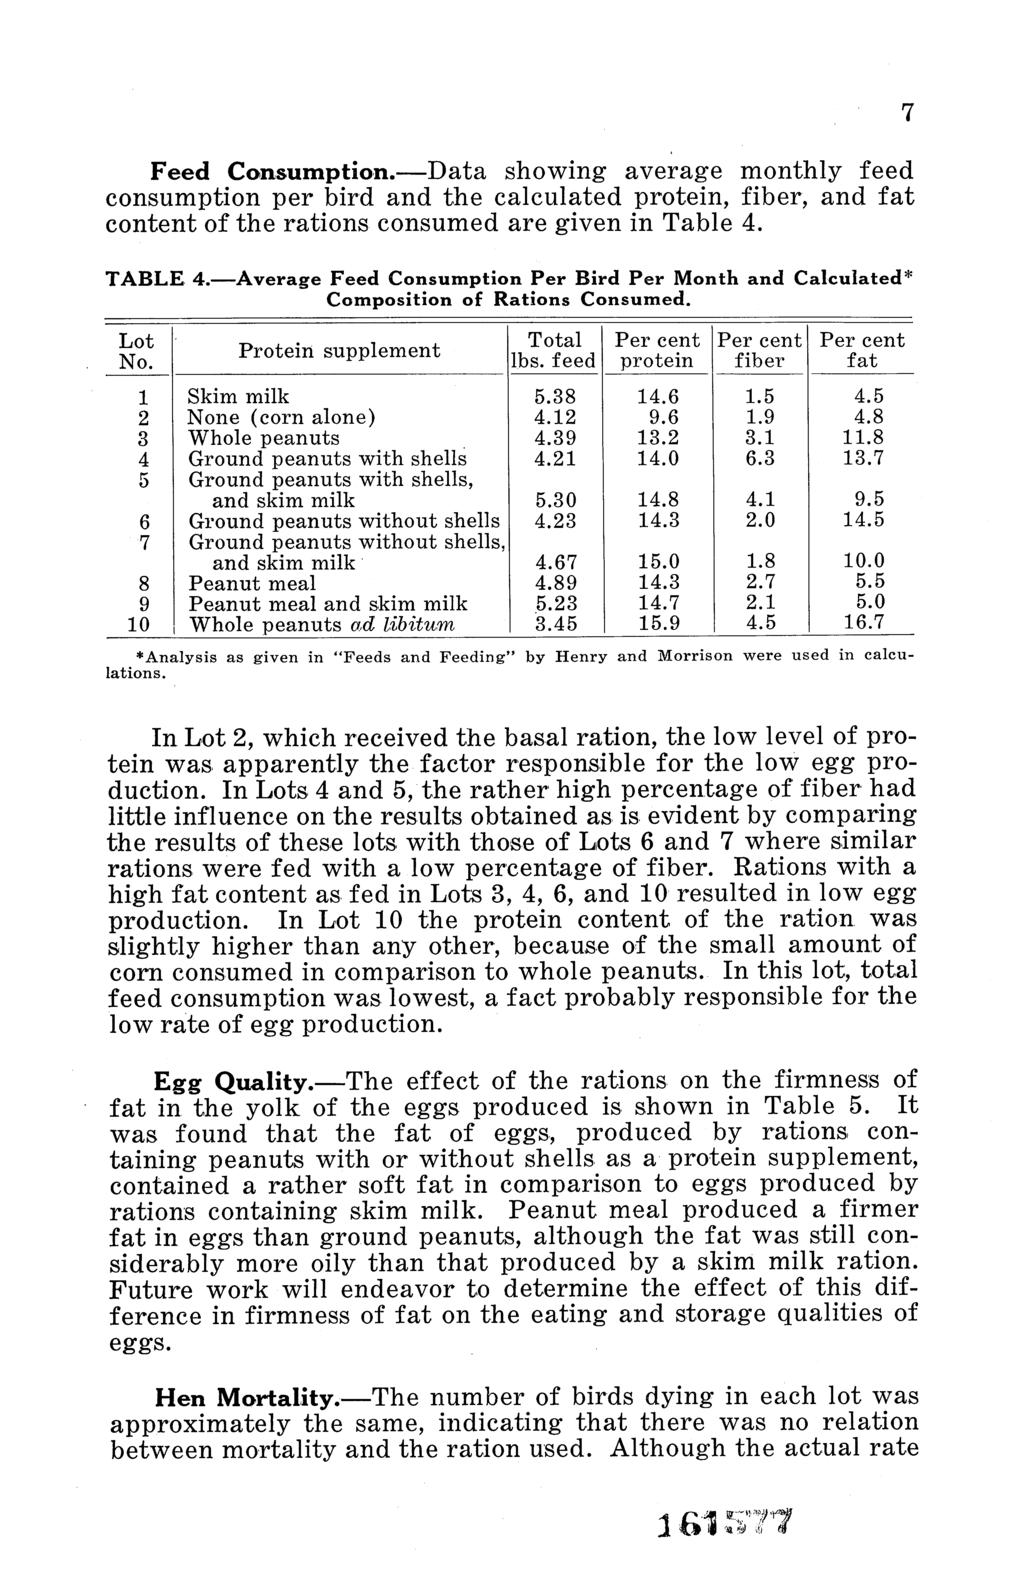 Feed Consumption.-Data showing average monthly feed consumption per bird and the calculated protein, fiber, and fat content of the rations consumed are given in Table 4. TABLE 4.